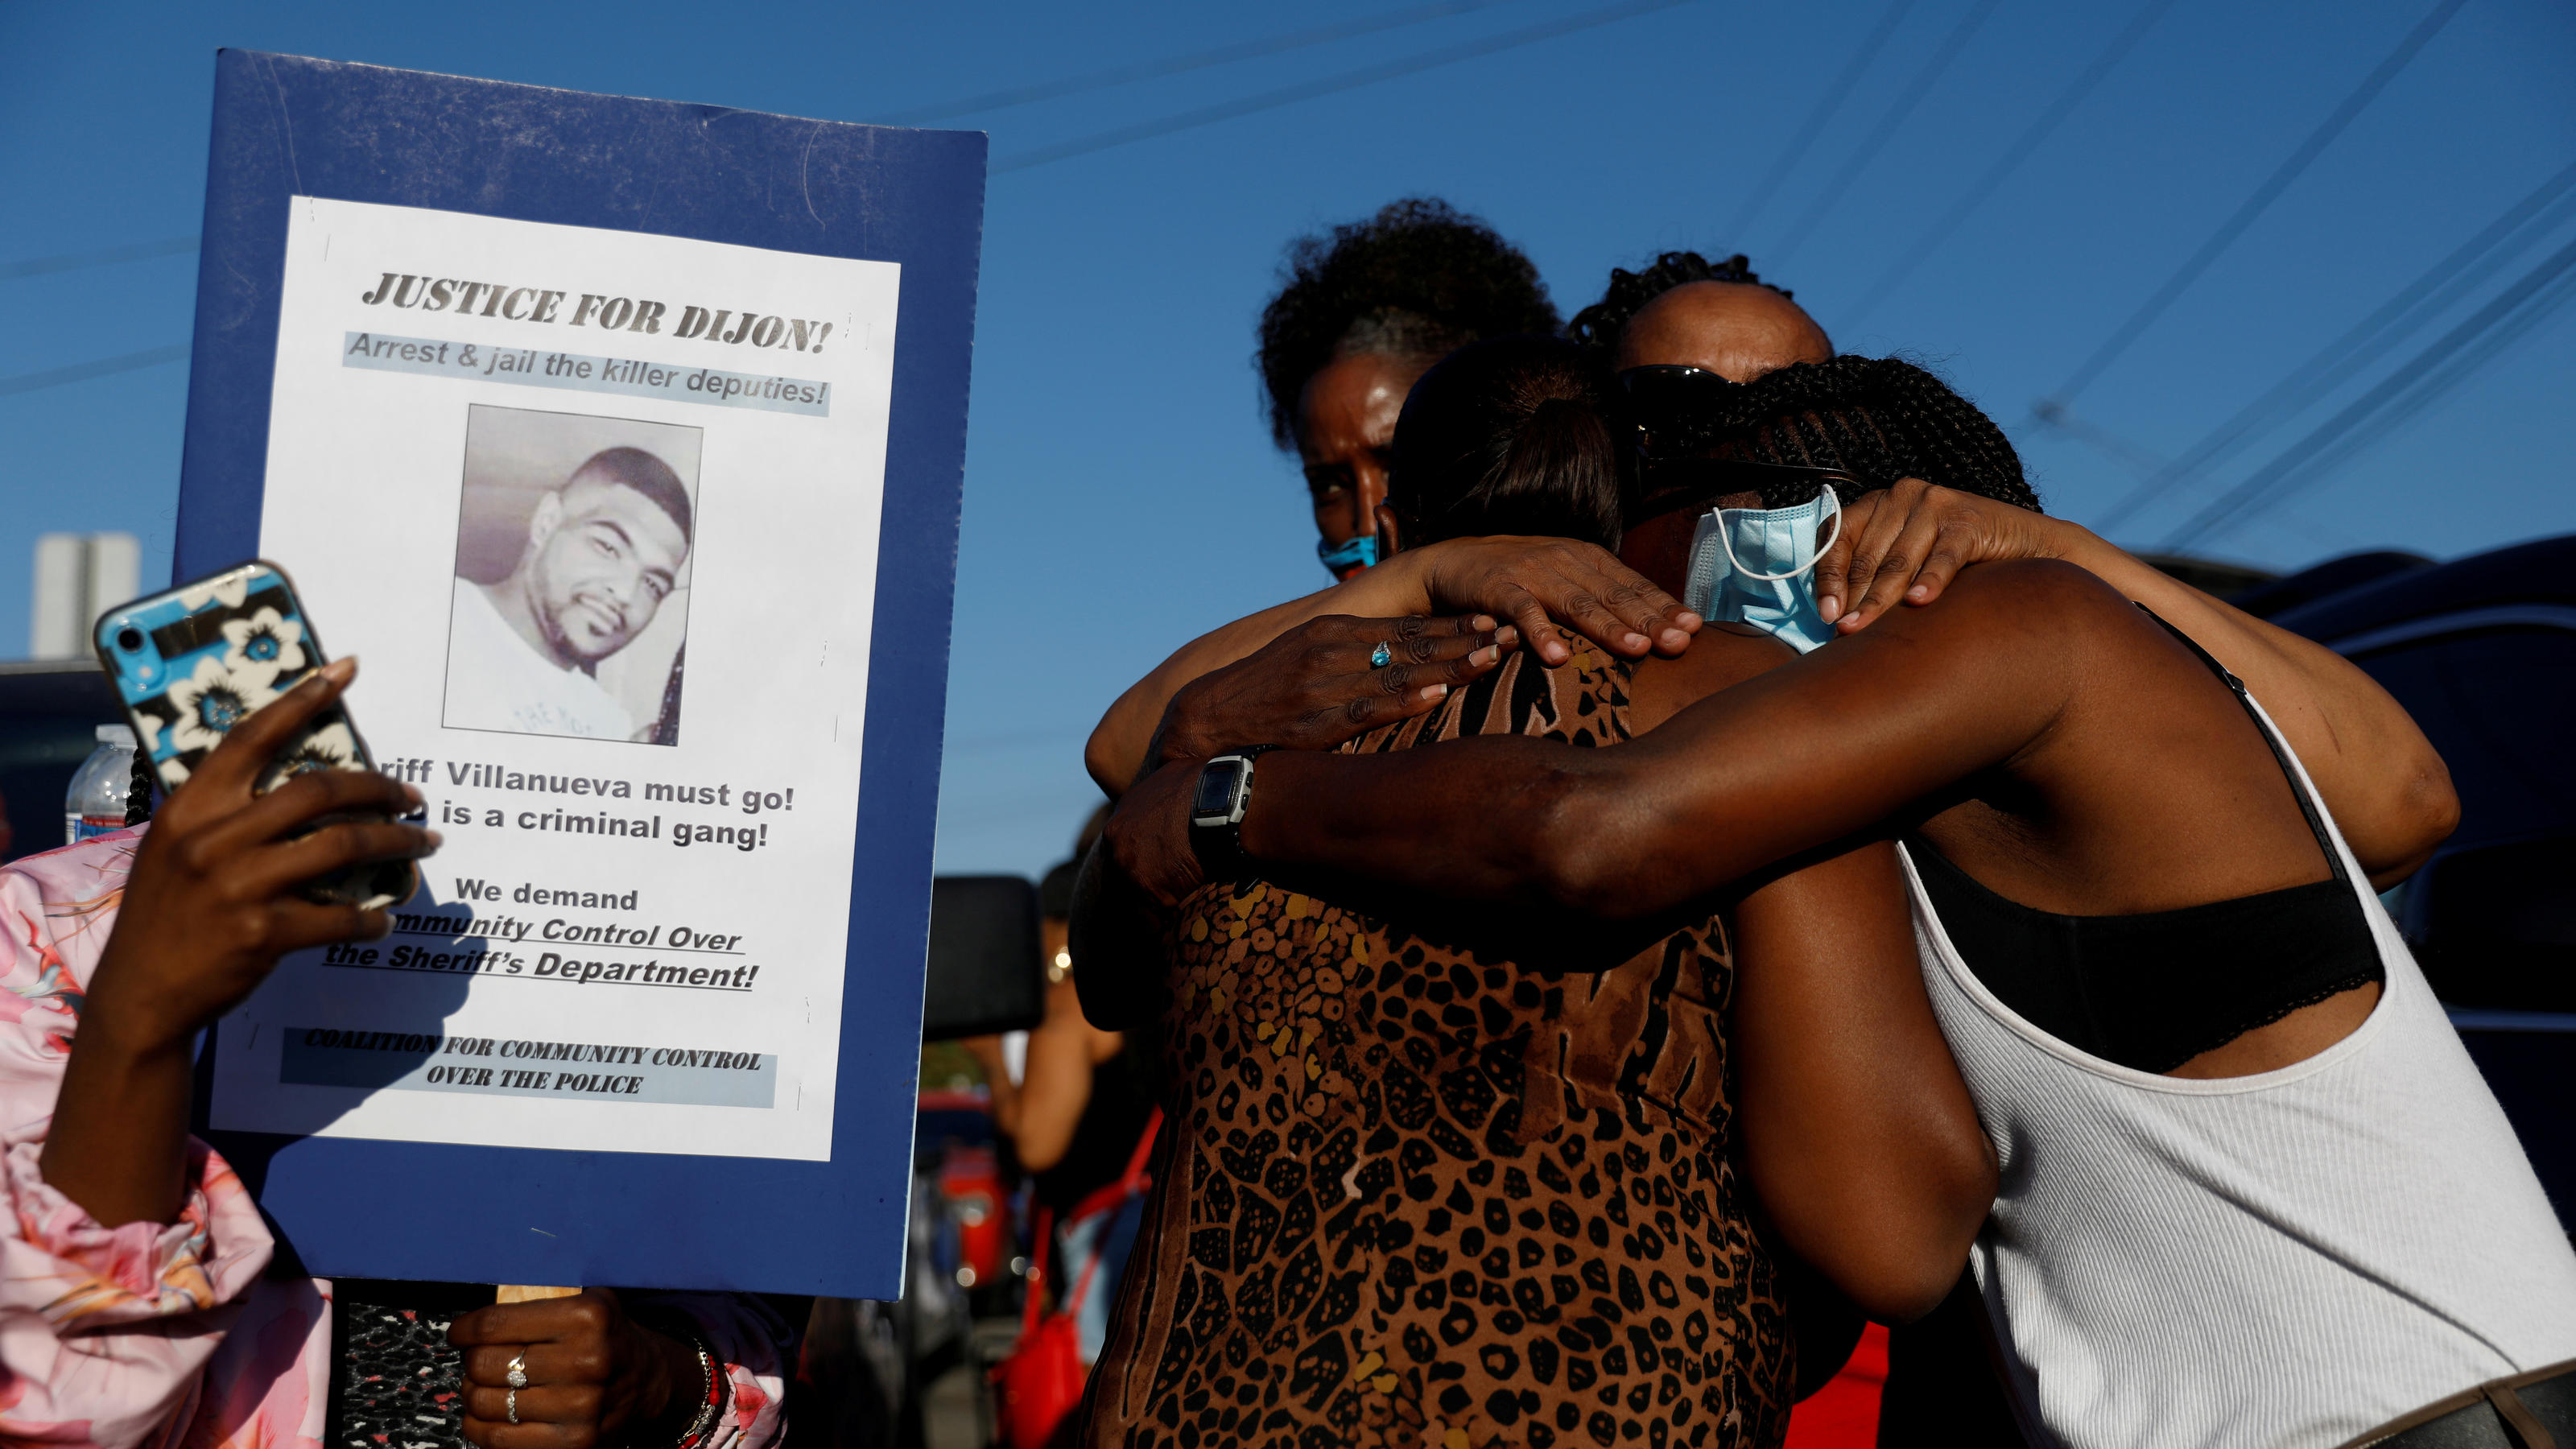 Debra Ray, aunt of Dijon Kizzee, is embraced by family members as people protest against the shooting of Dijon Kizzee by Los Angeles sheriff's deputies, in Los Angeles, California, U.S., September 1, 2020. REUTERS/Patrick T. Fallon